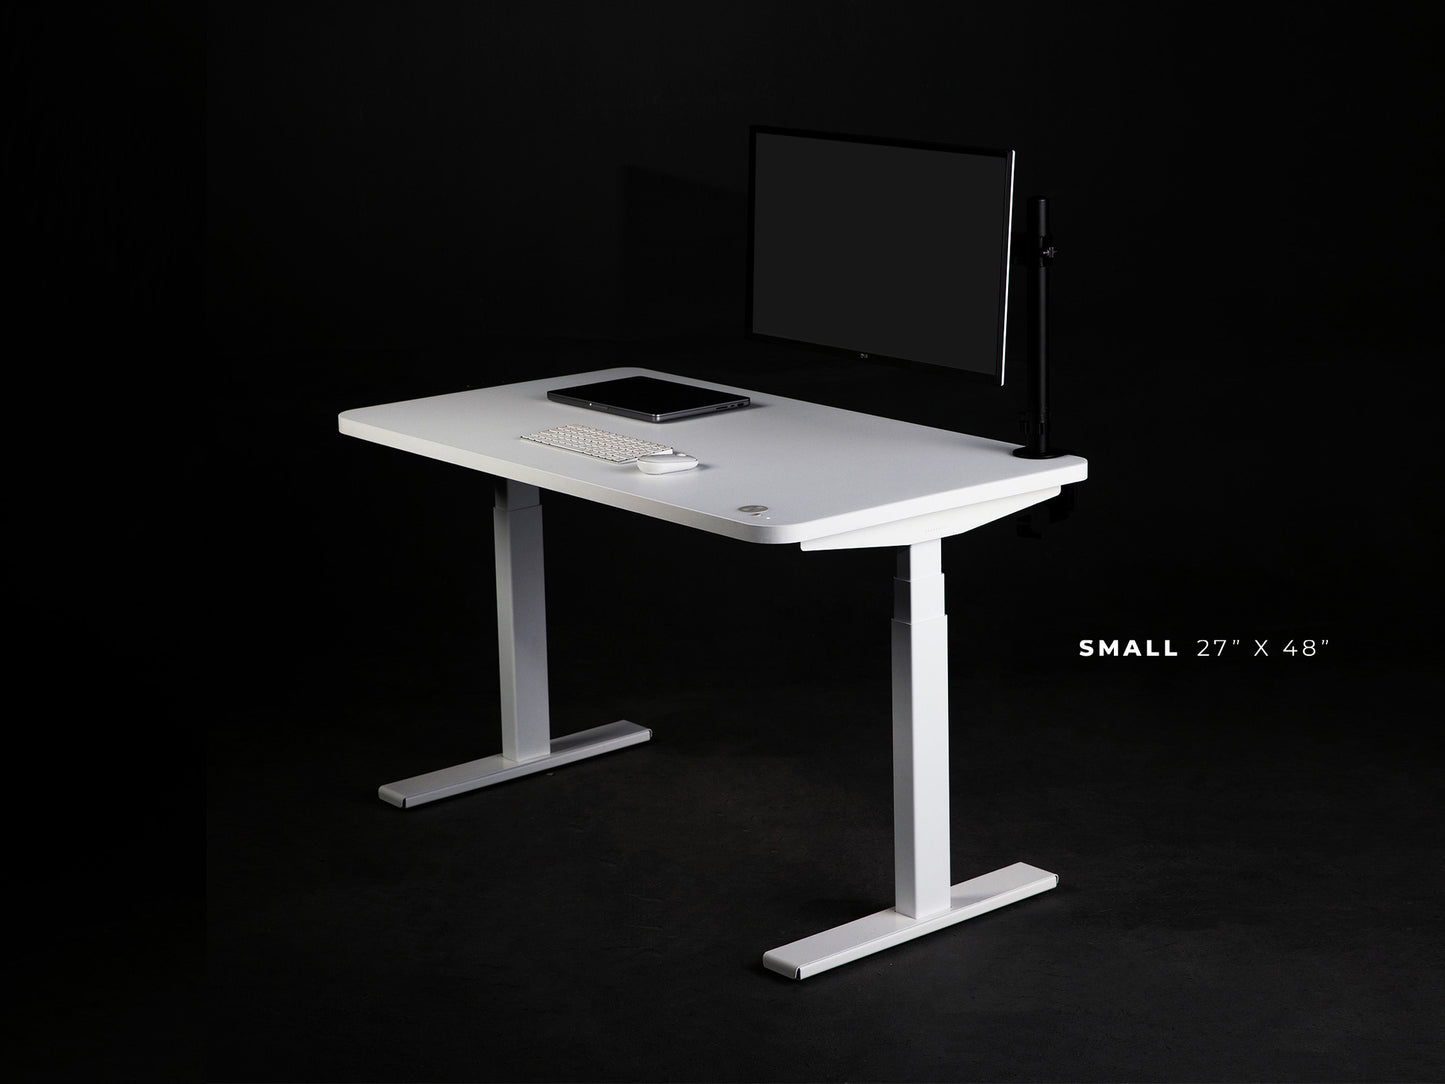 The Charcoal Desk